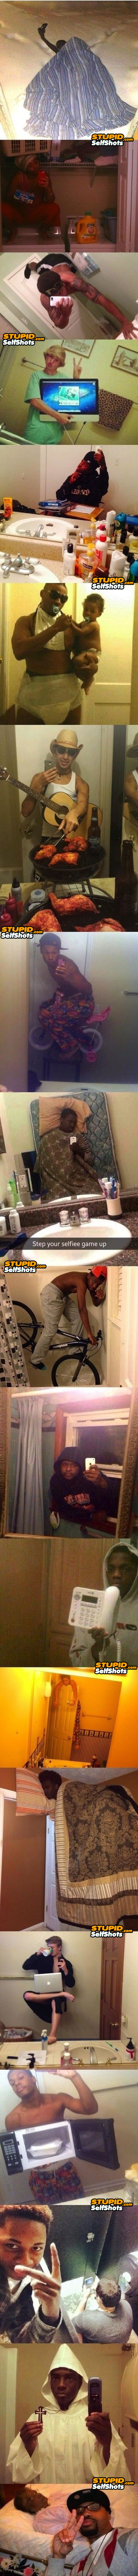 Step your game up! Selfies Compilation